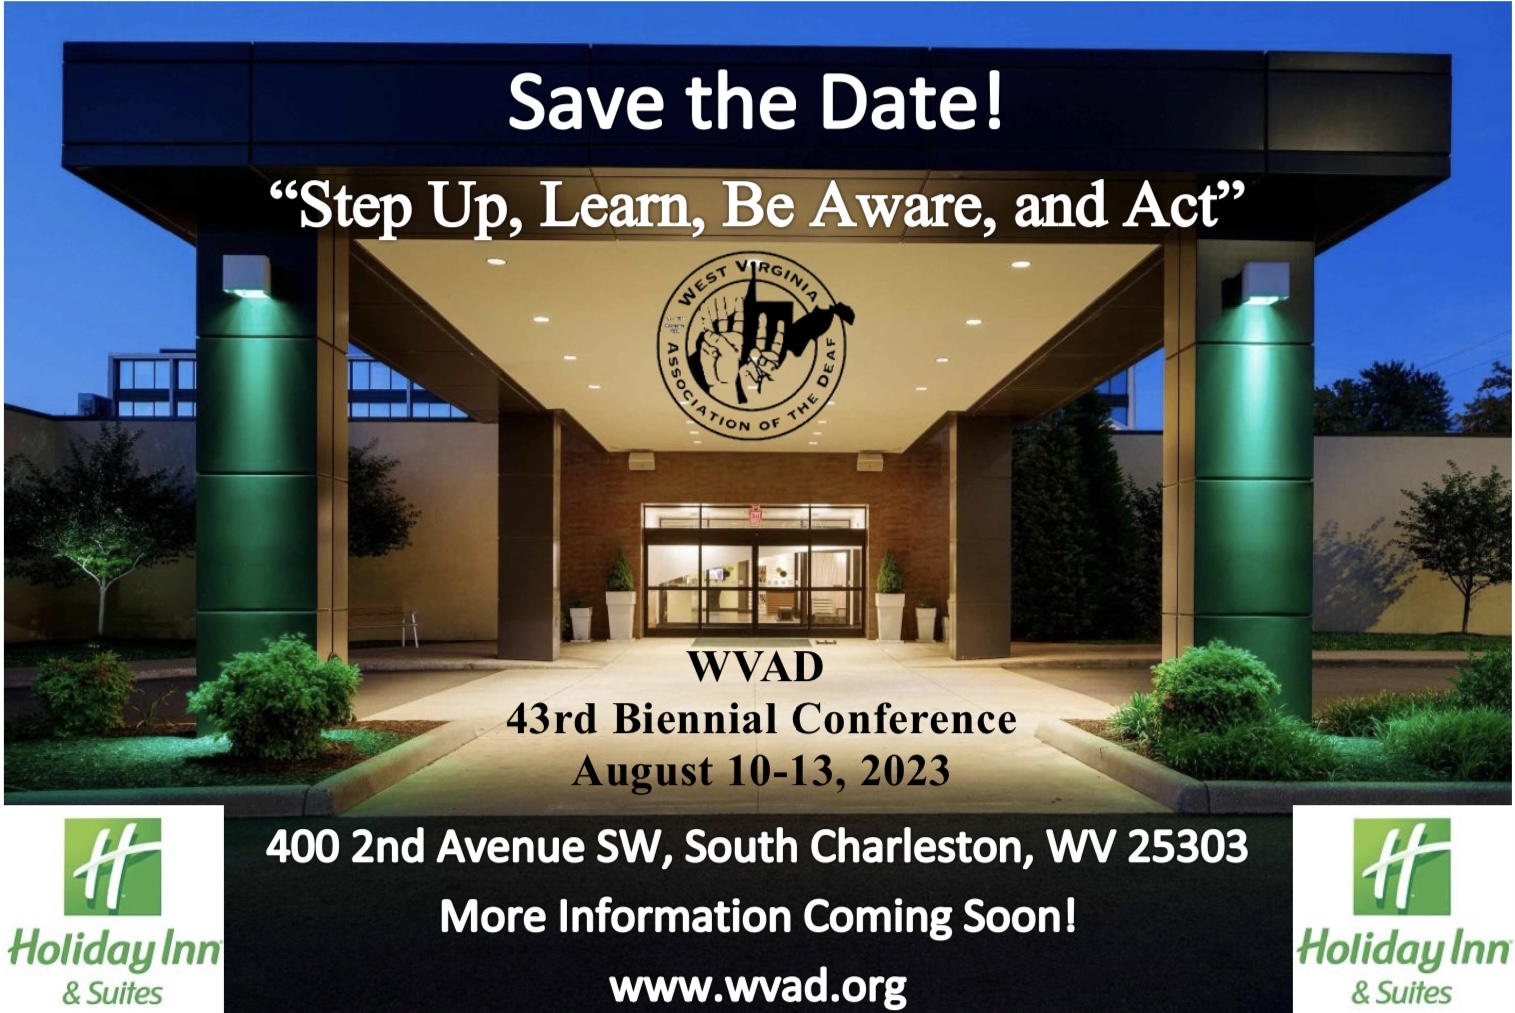 Save the date! Step up, Learn, Be Aware, and Act. WVAD 43rd Biennial Conference, August 10-13, 2023. 400 2nd Avenue Southwest, South Charleston, WV 25303.